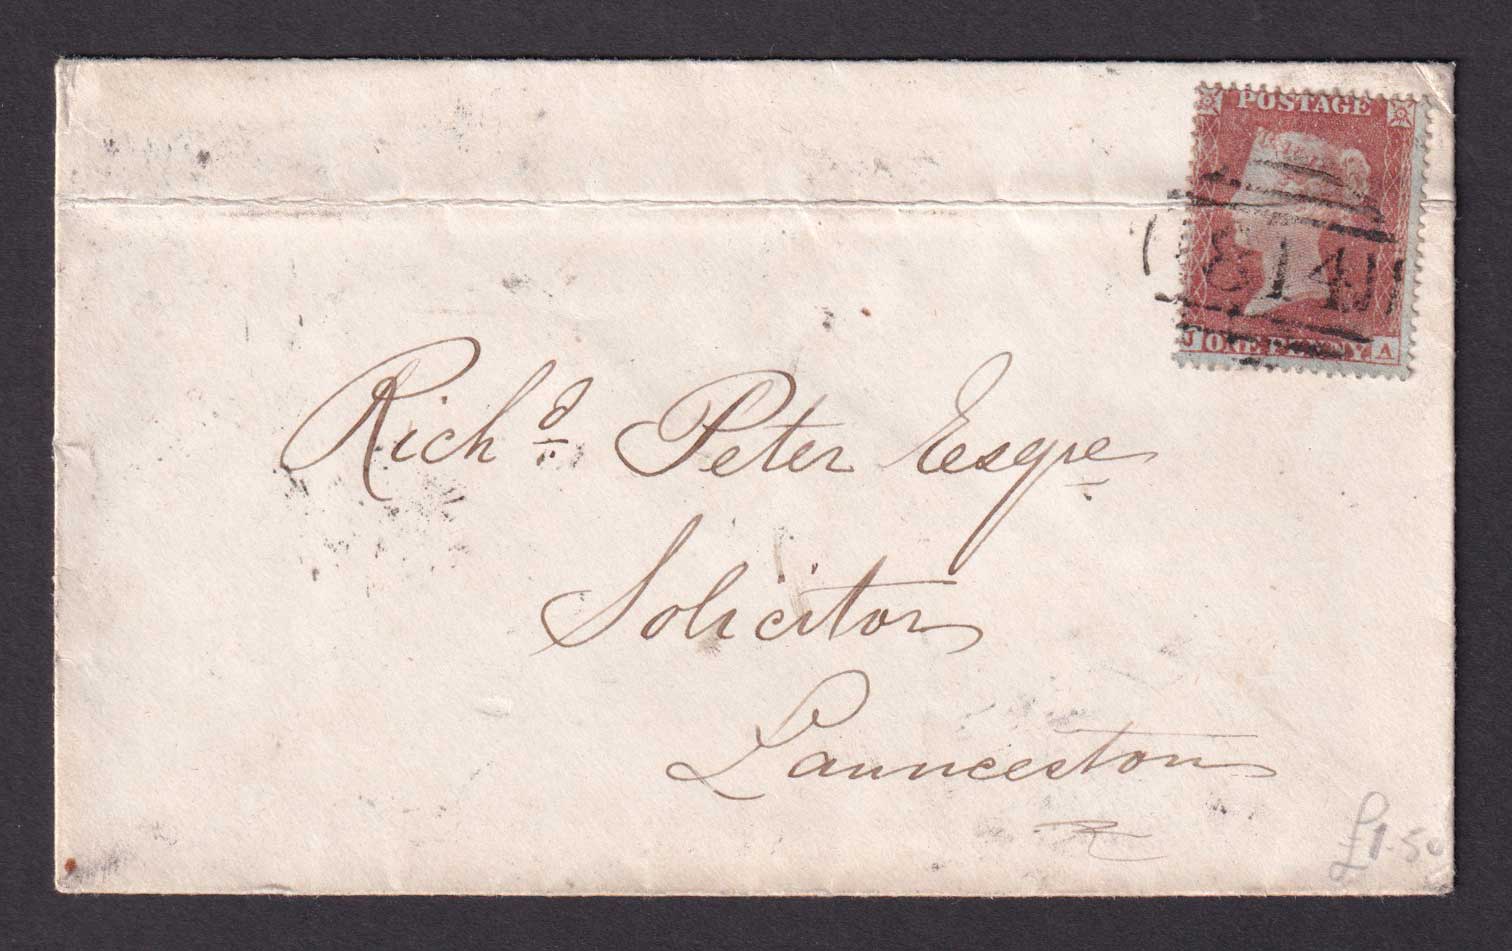 Great Britain QV 1855 1d Penny Red Stars 'JA' Cover from Truro to Launceston via Plymouth 814 Truro Numeral Horizontal Oval Postal History